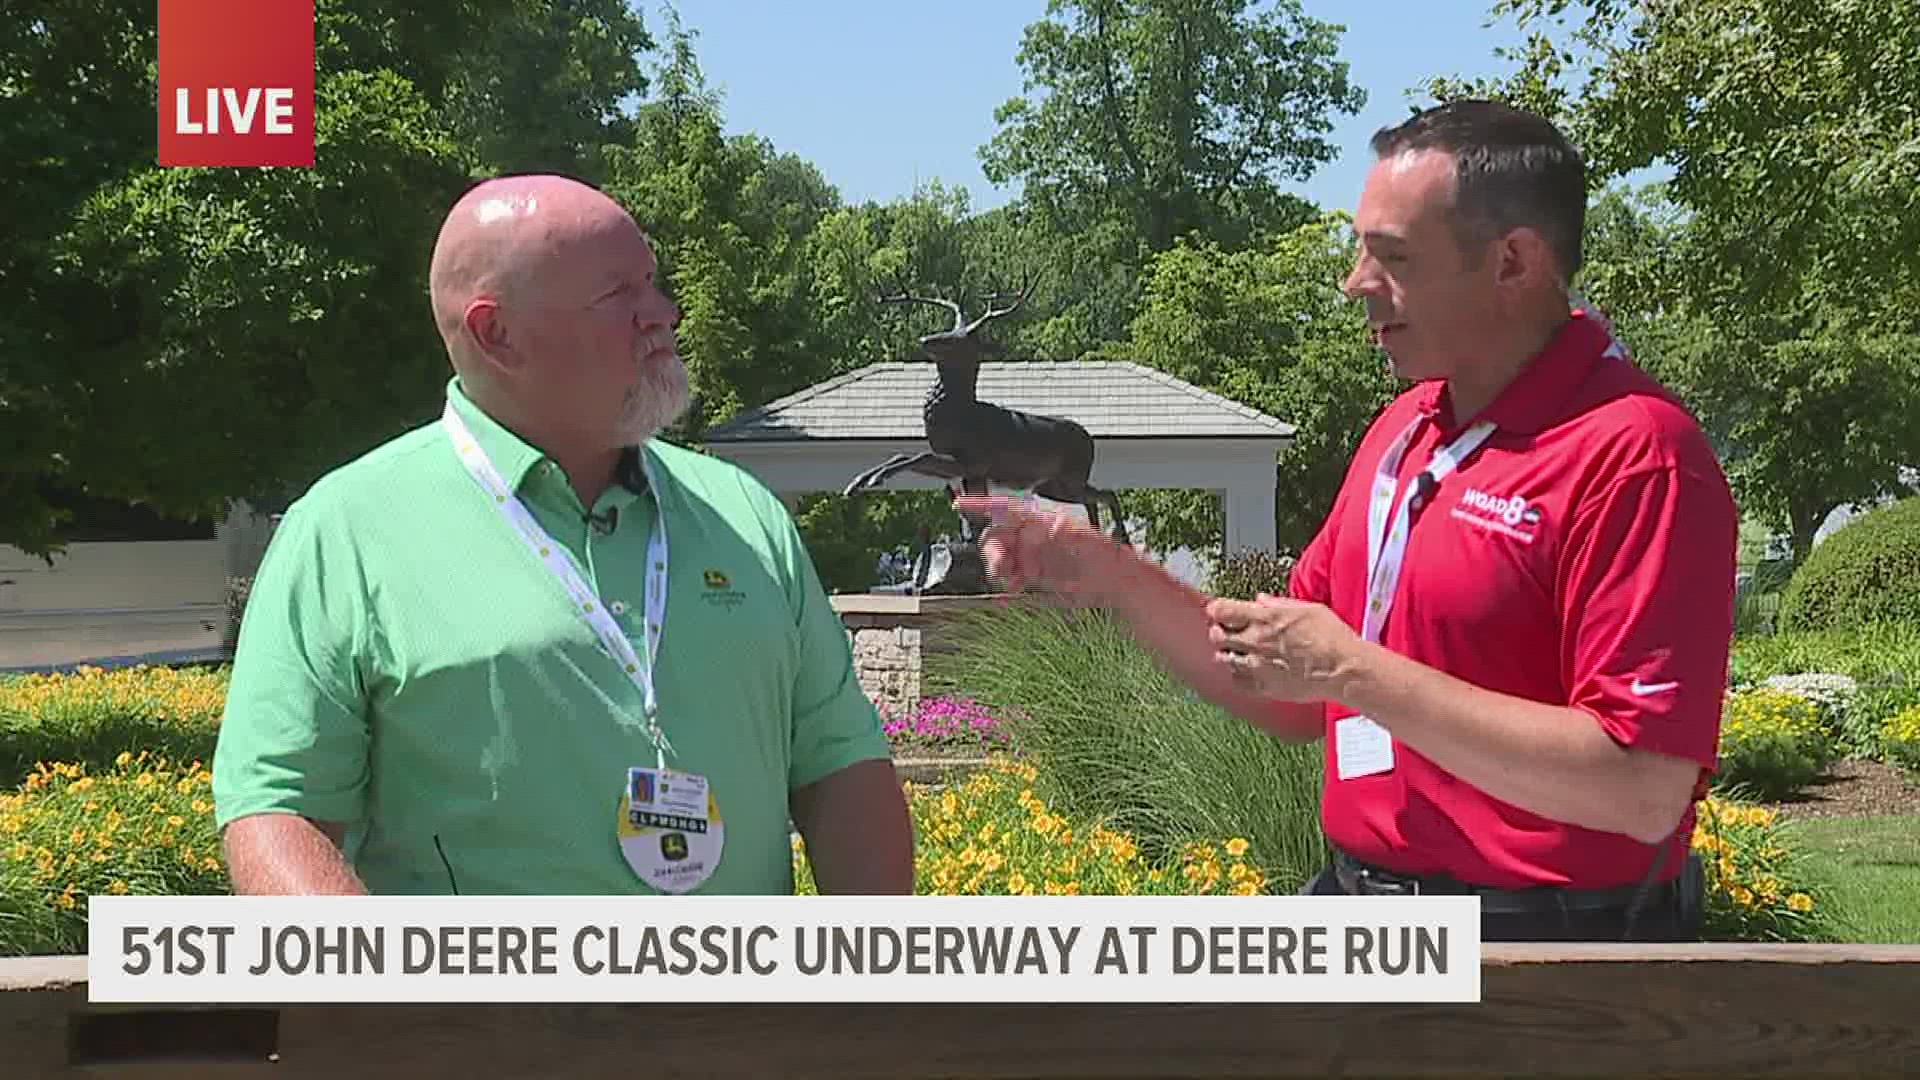 As golfers tee up for Day 1 of the John Deere Classic, Tournament Chair Pat Eikenberry talks about what went into this year's event.